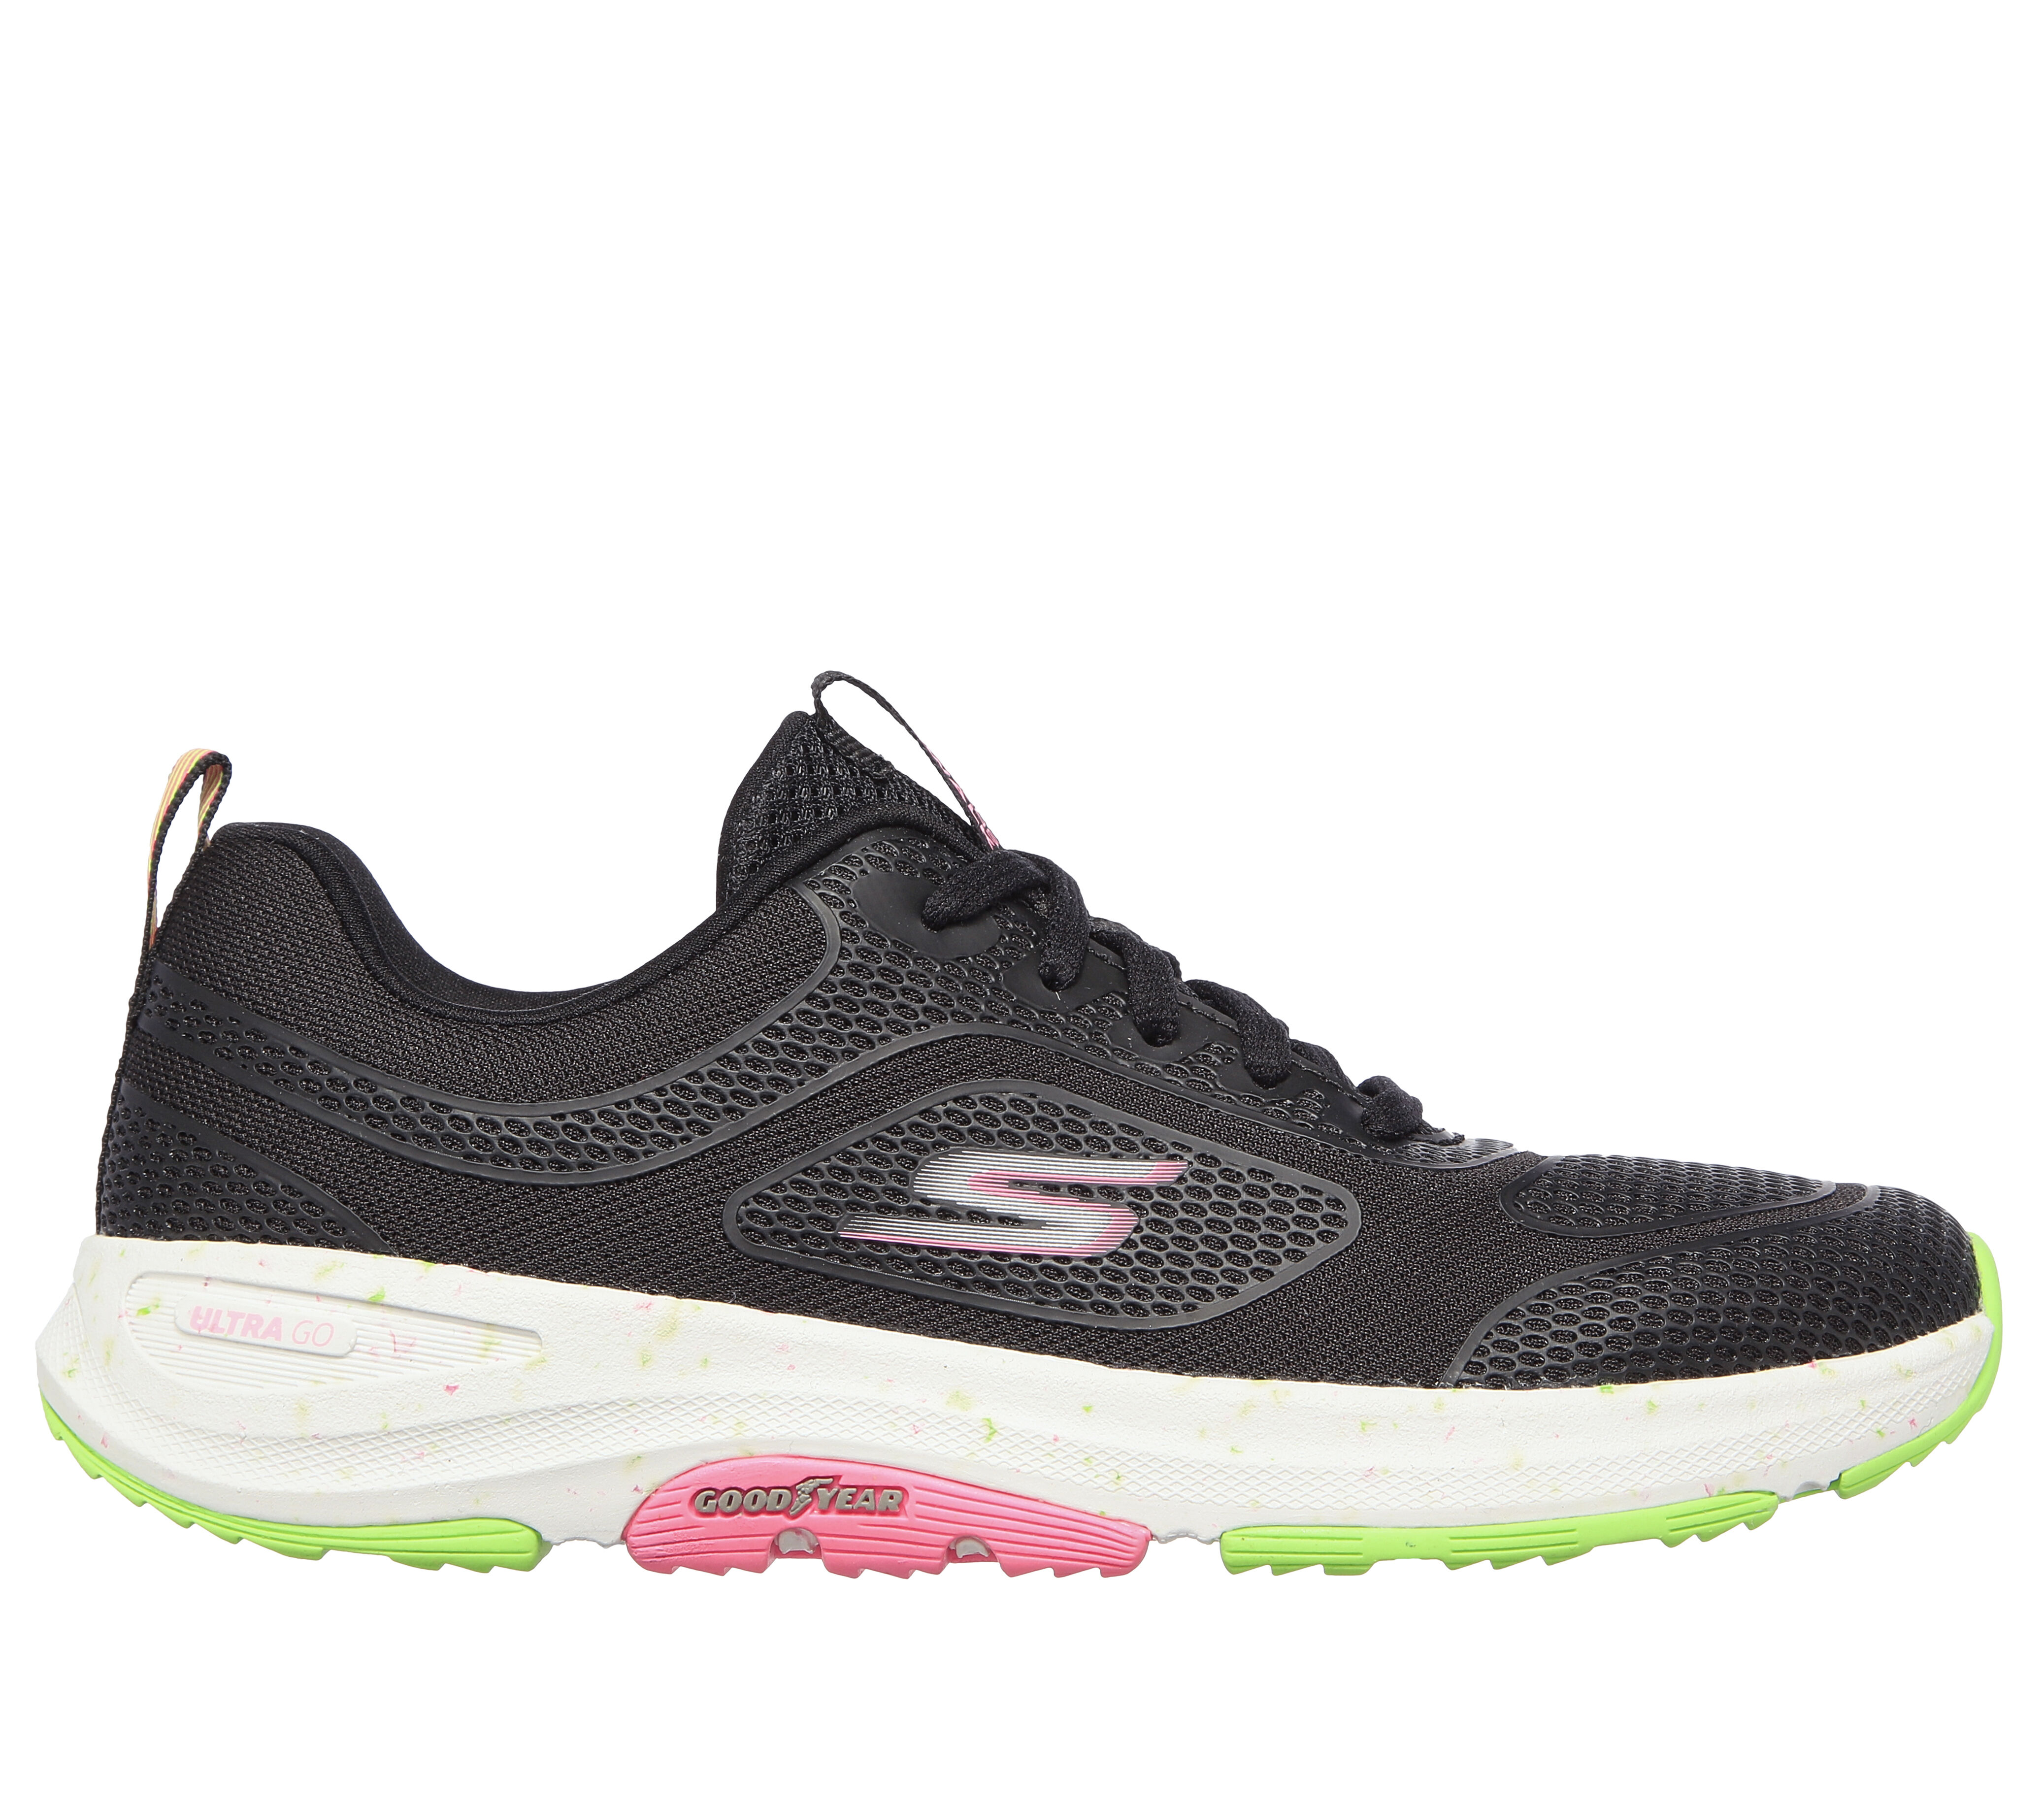 pink and black skechers